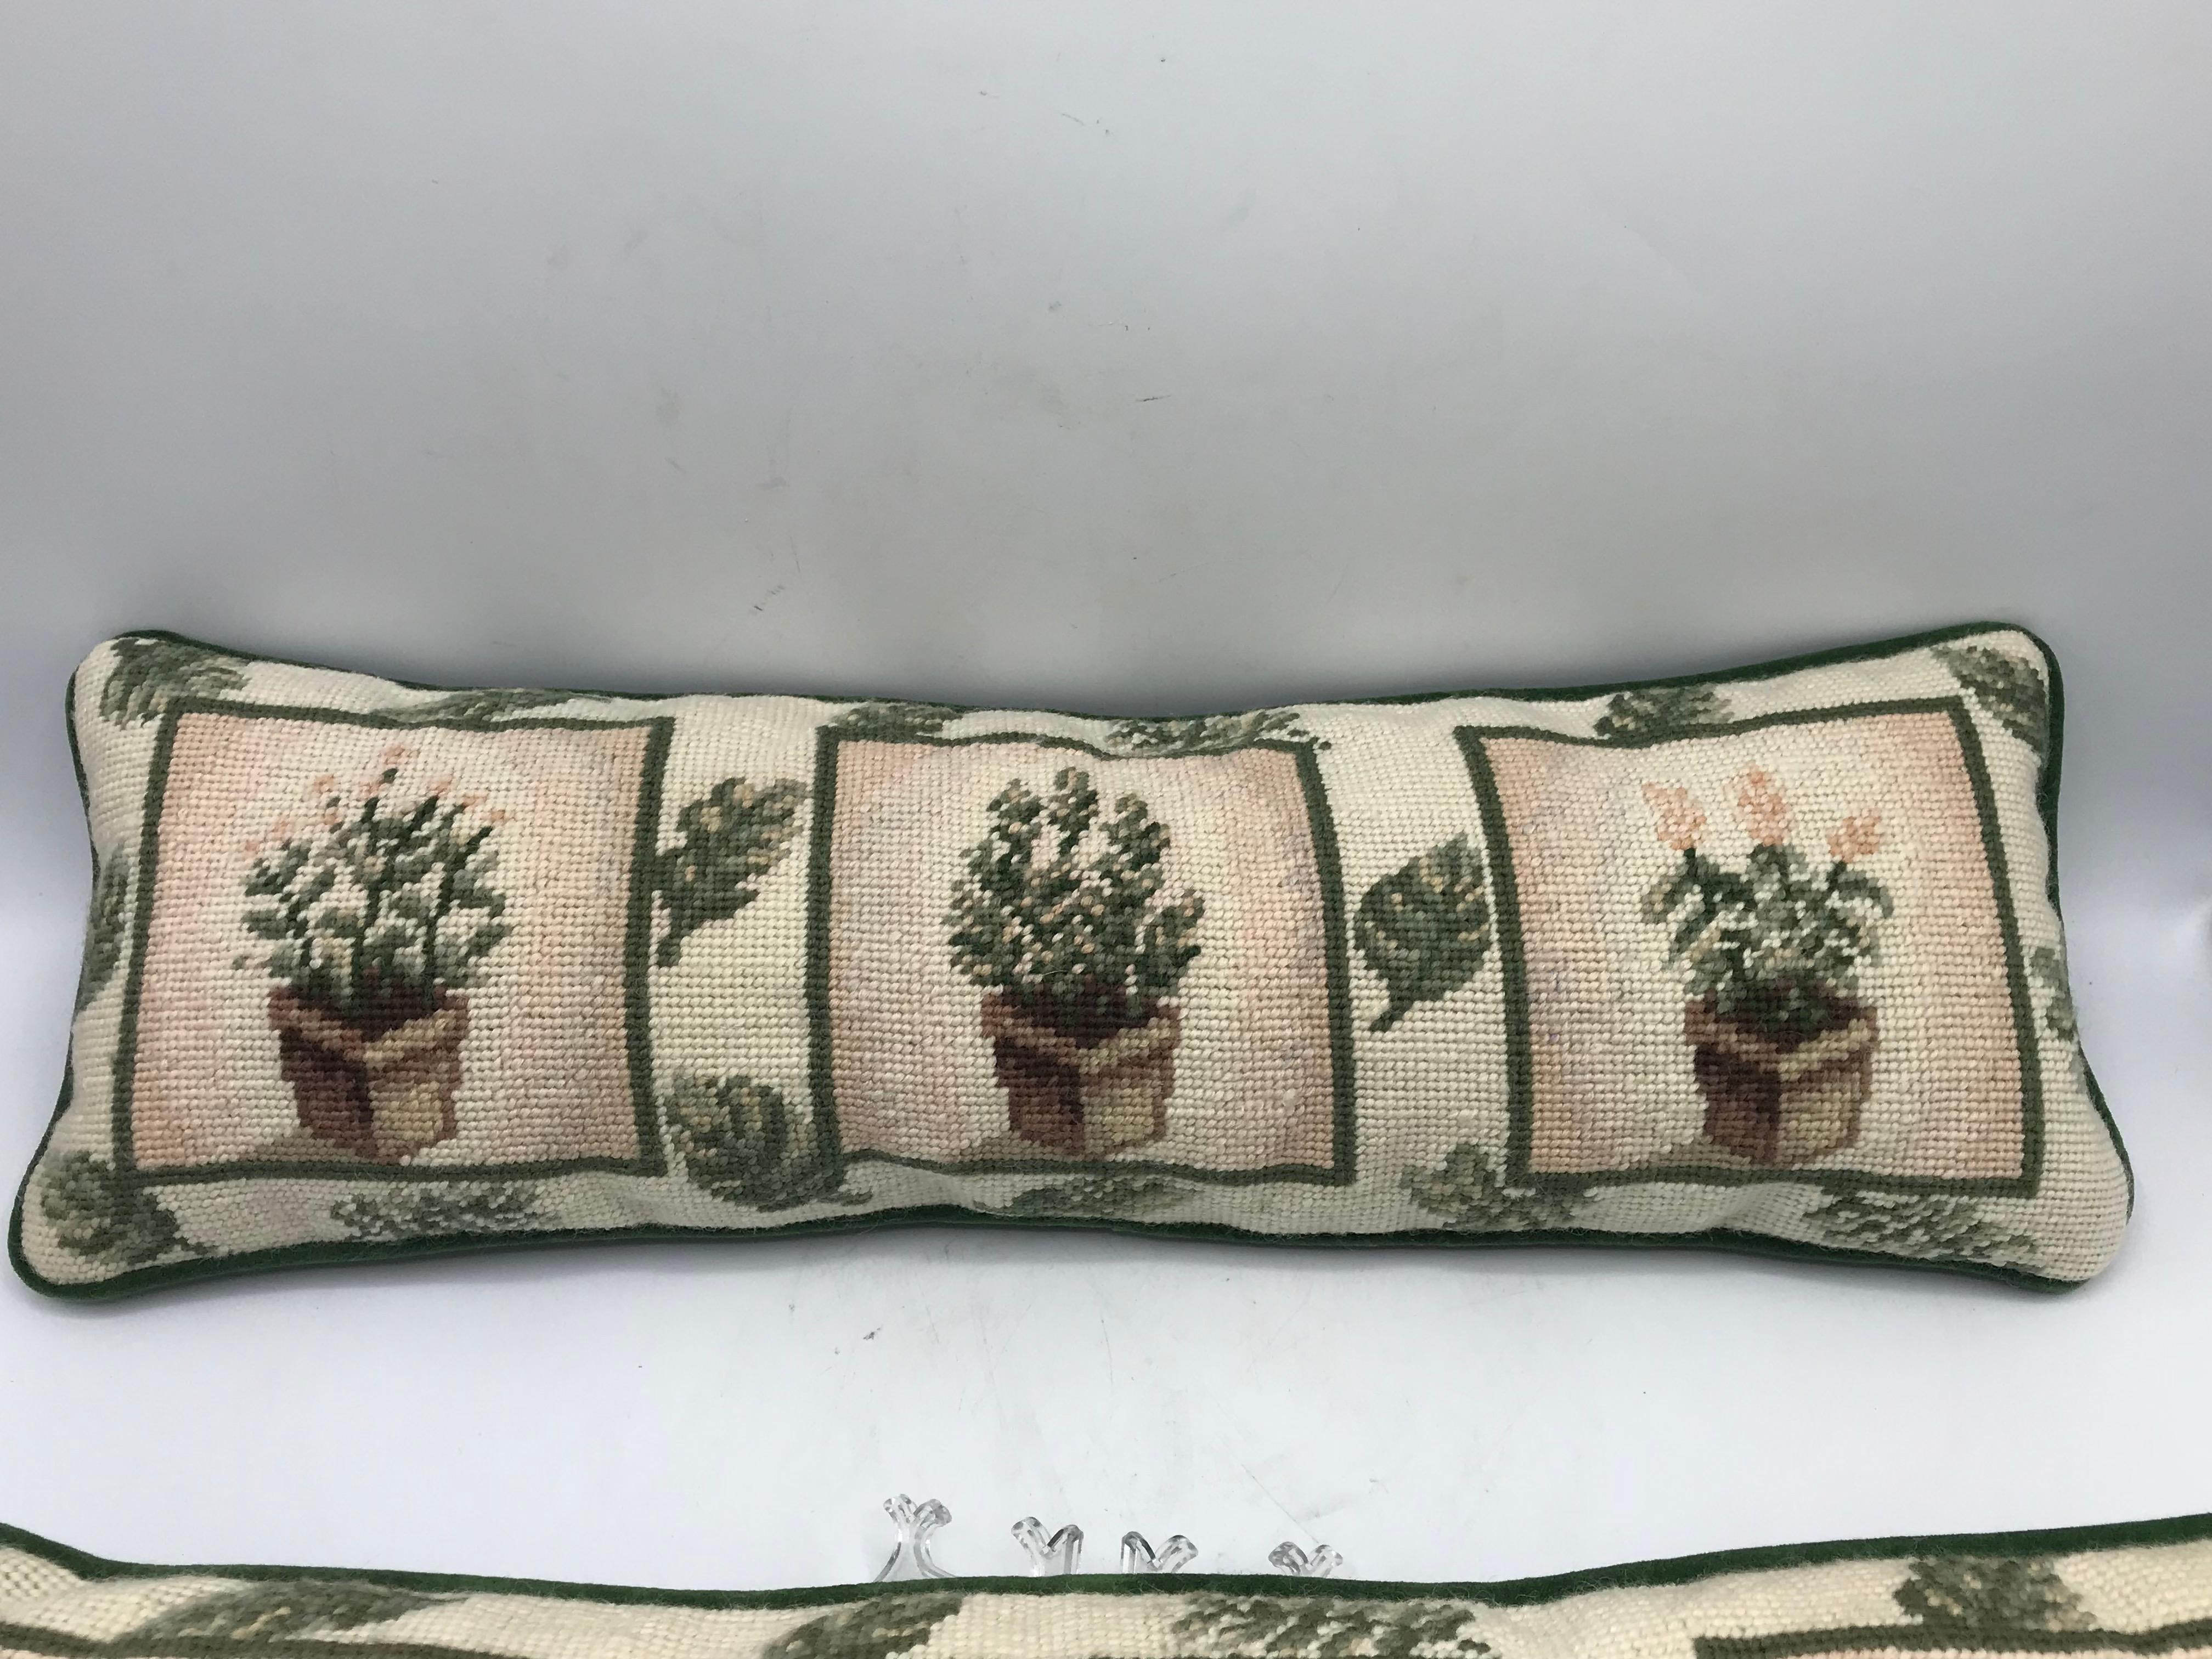 Offered is a stunning, pair of 1980s needlepoint lumbar pillows. The pair has a beautiful, identical, planted topiary motif on each. Velvet backside. Poly-fill. No zipper.